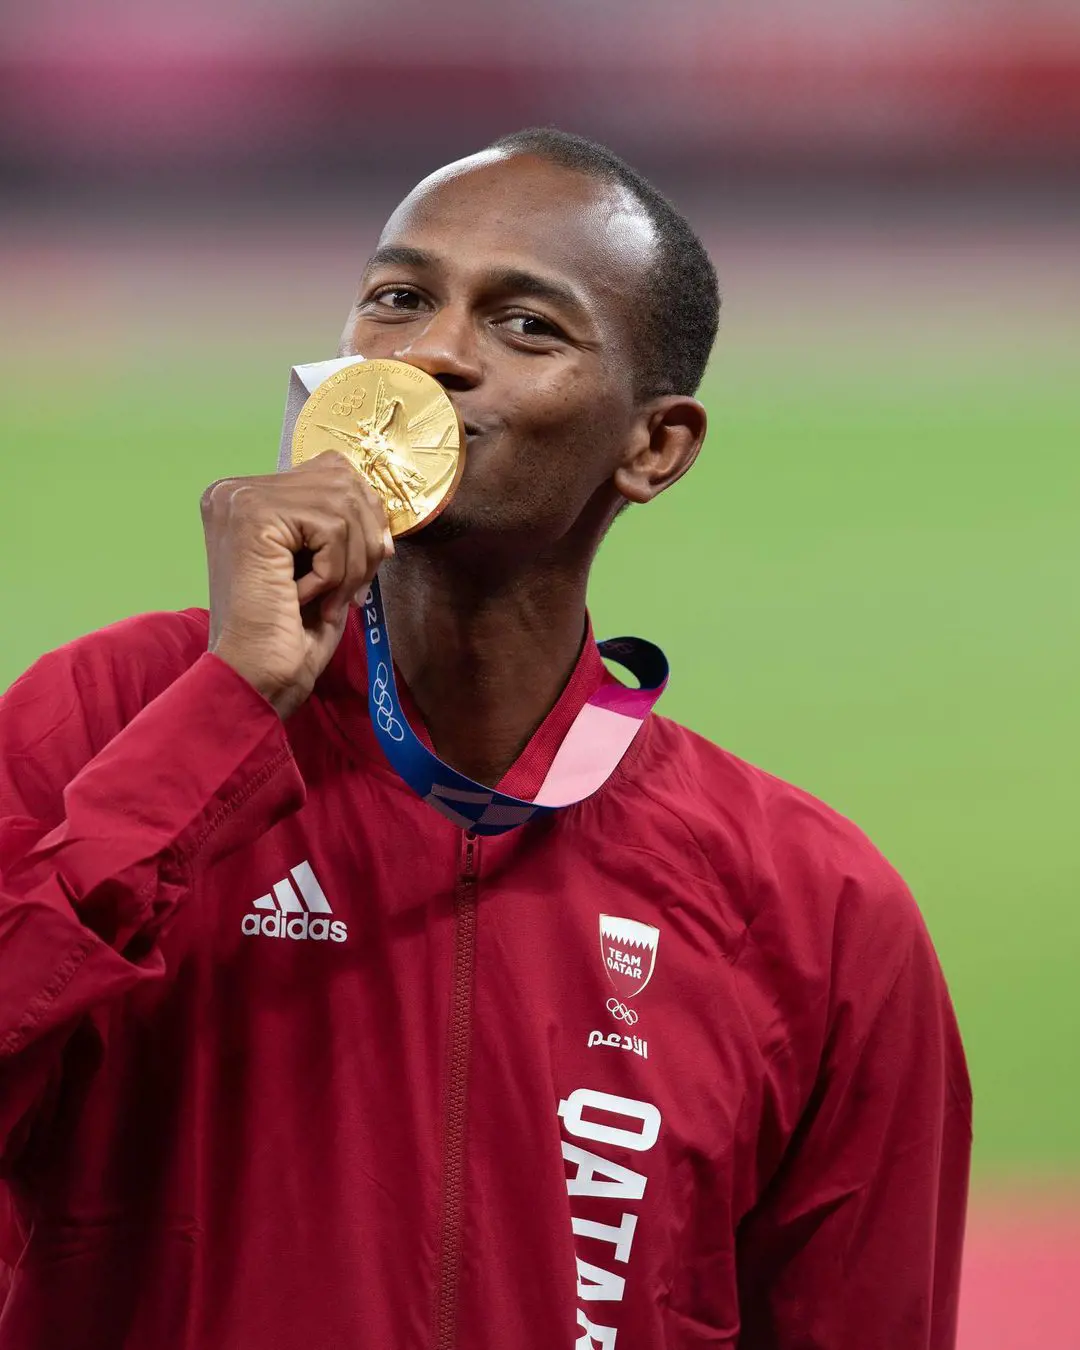 Mutaz Essa Barshim pictured kissing his gold medal as he shares the position with Tamberi